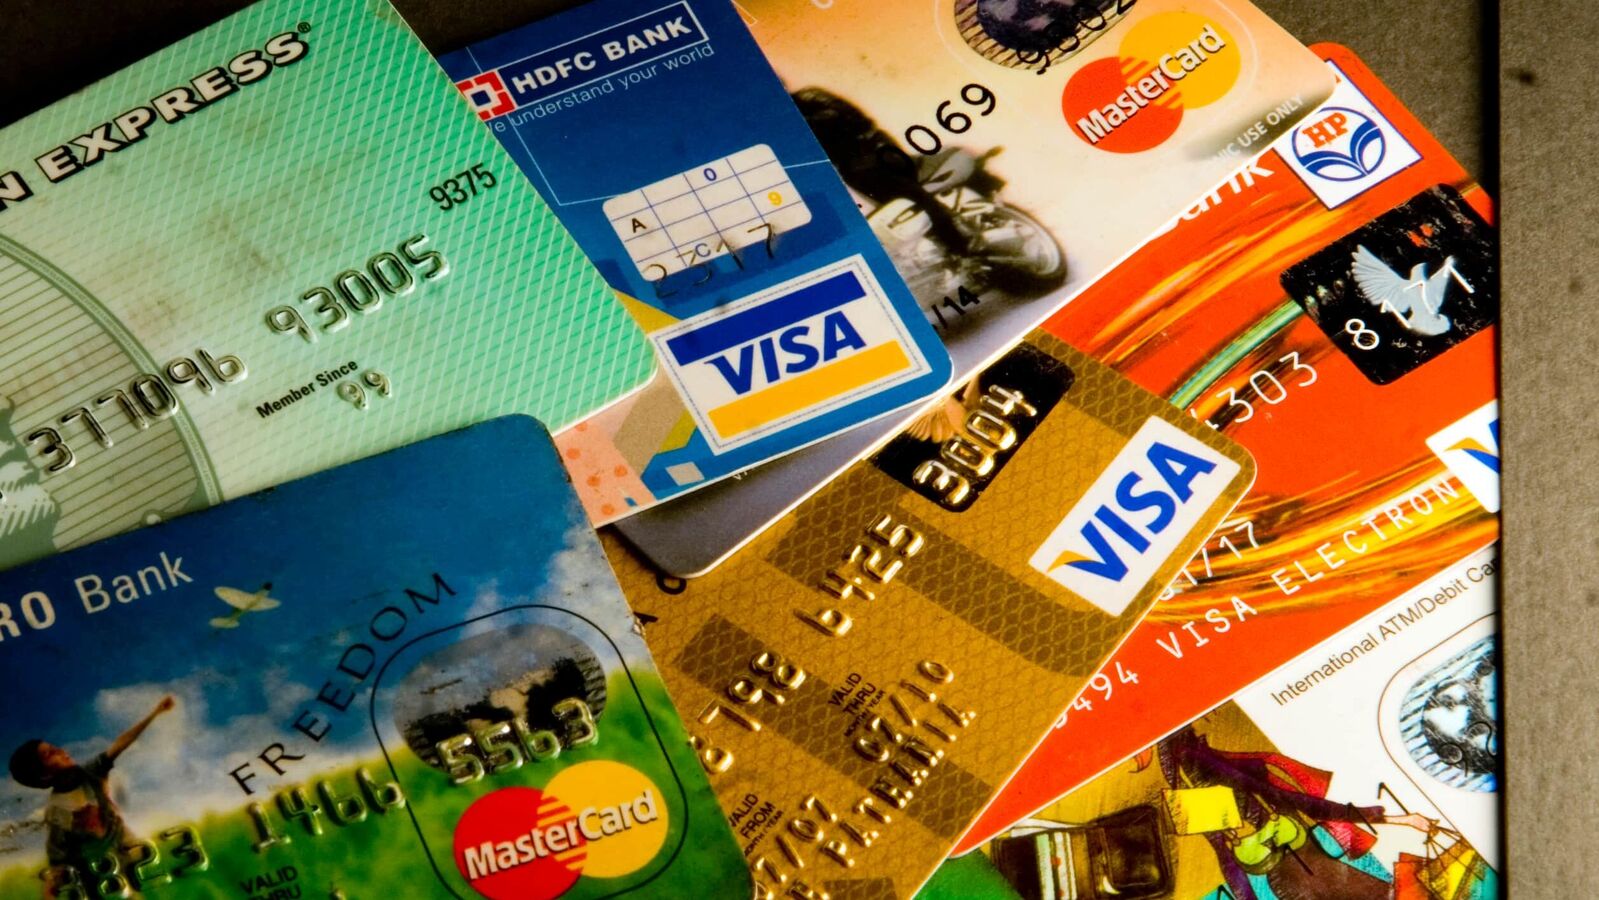 How to tackle fraudulent transactions on your credit card? A step-by-step guide